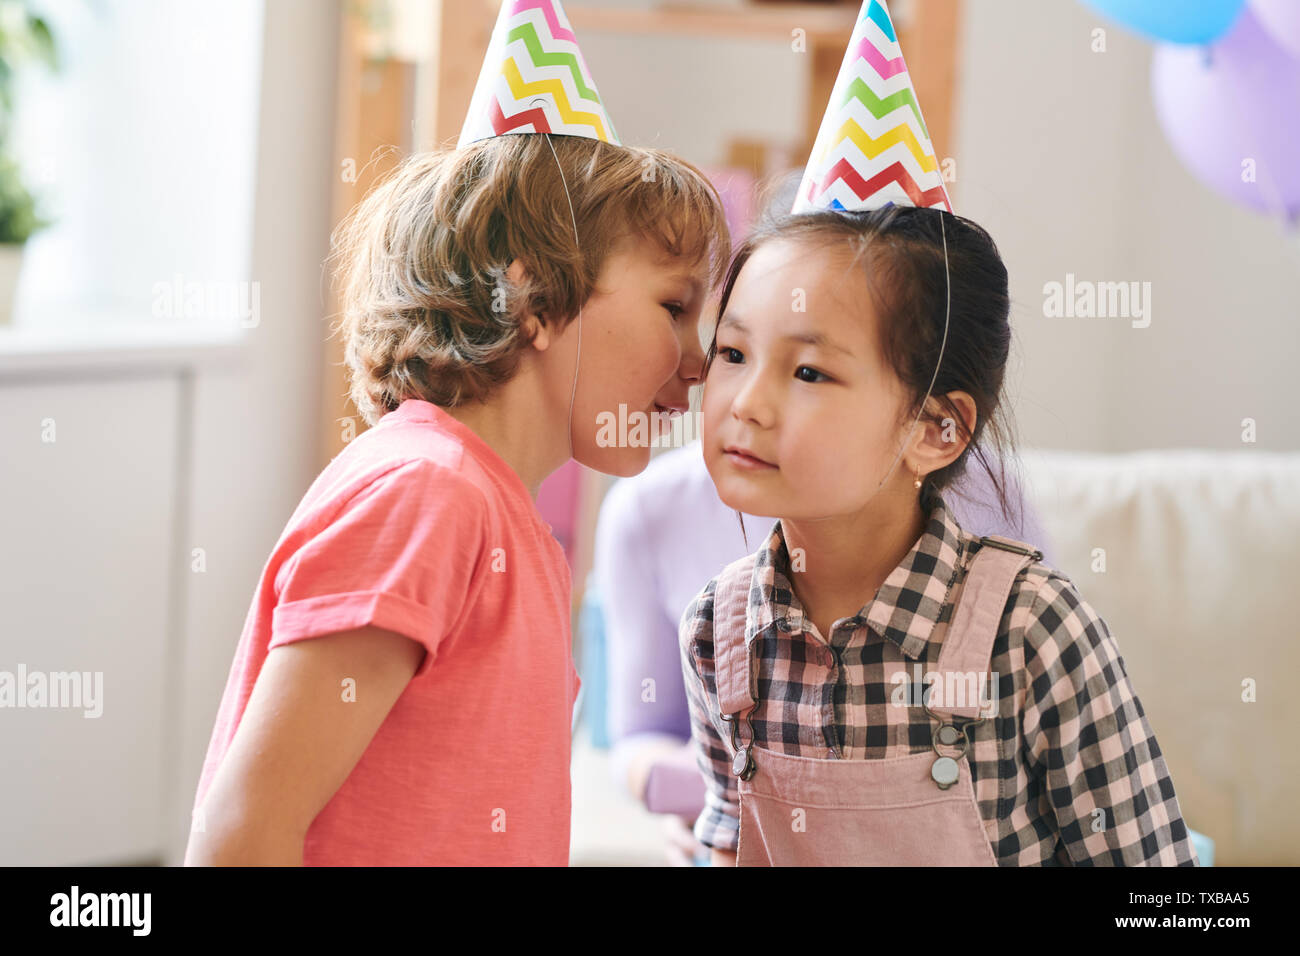 Adorable kids in birthday caps playing childish game Stock Photo